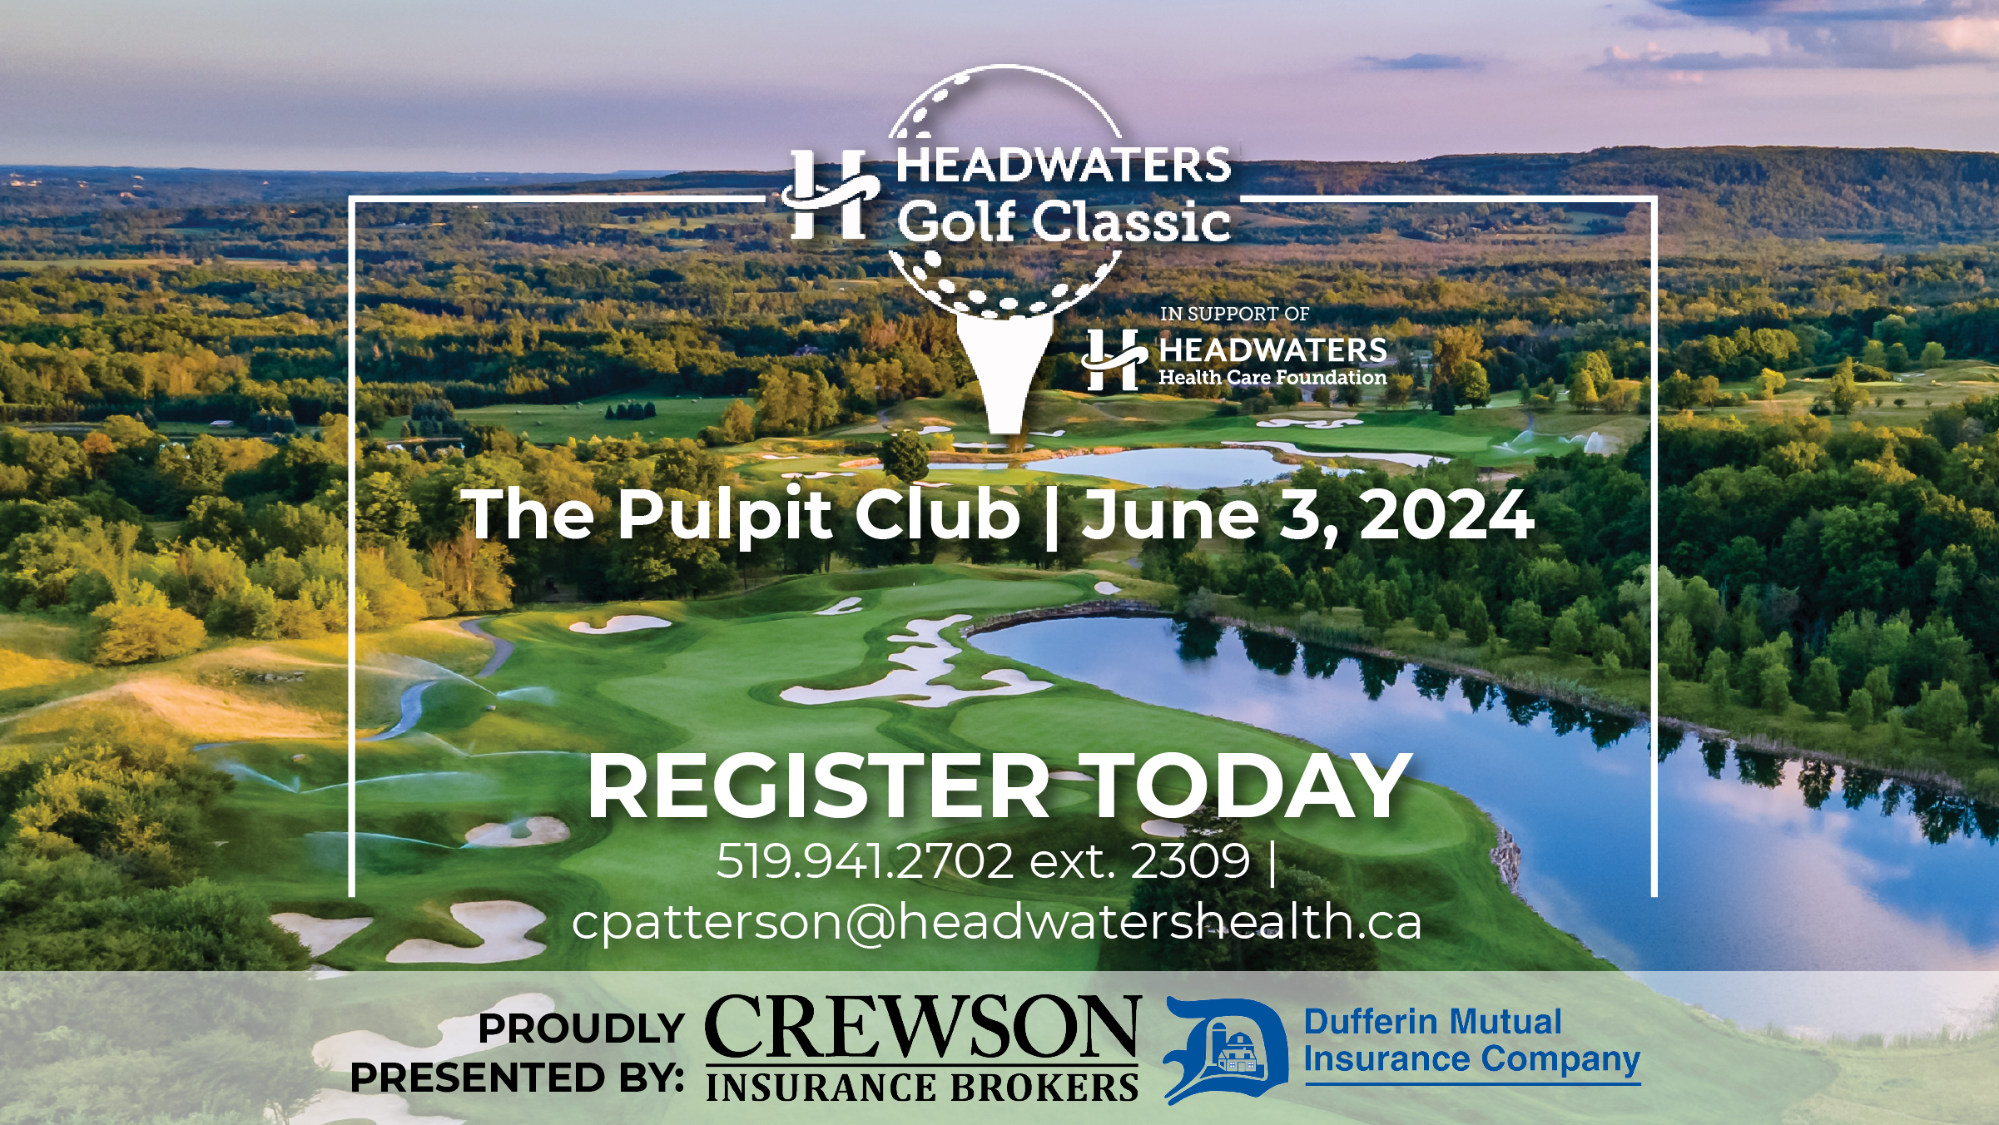 Picture of a golf course with text overlay encouraging people to sign up for the Headwaters Health Care Foundation annual golf tournament.